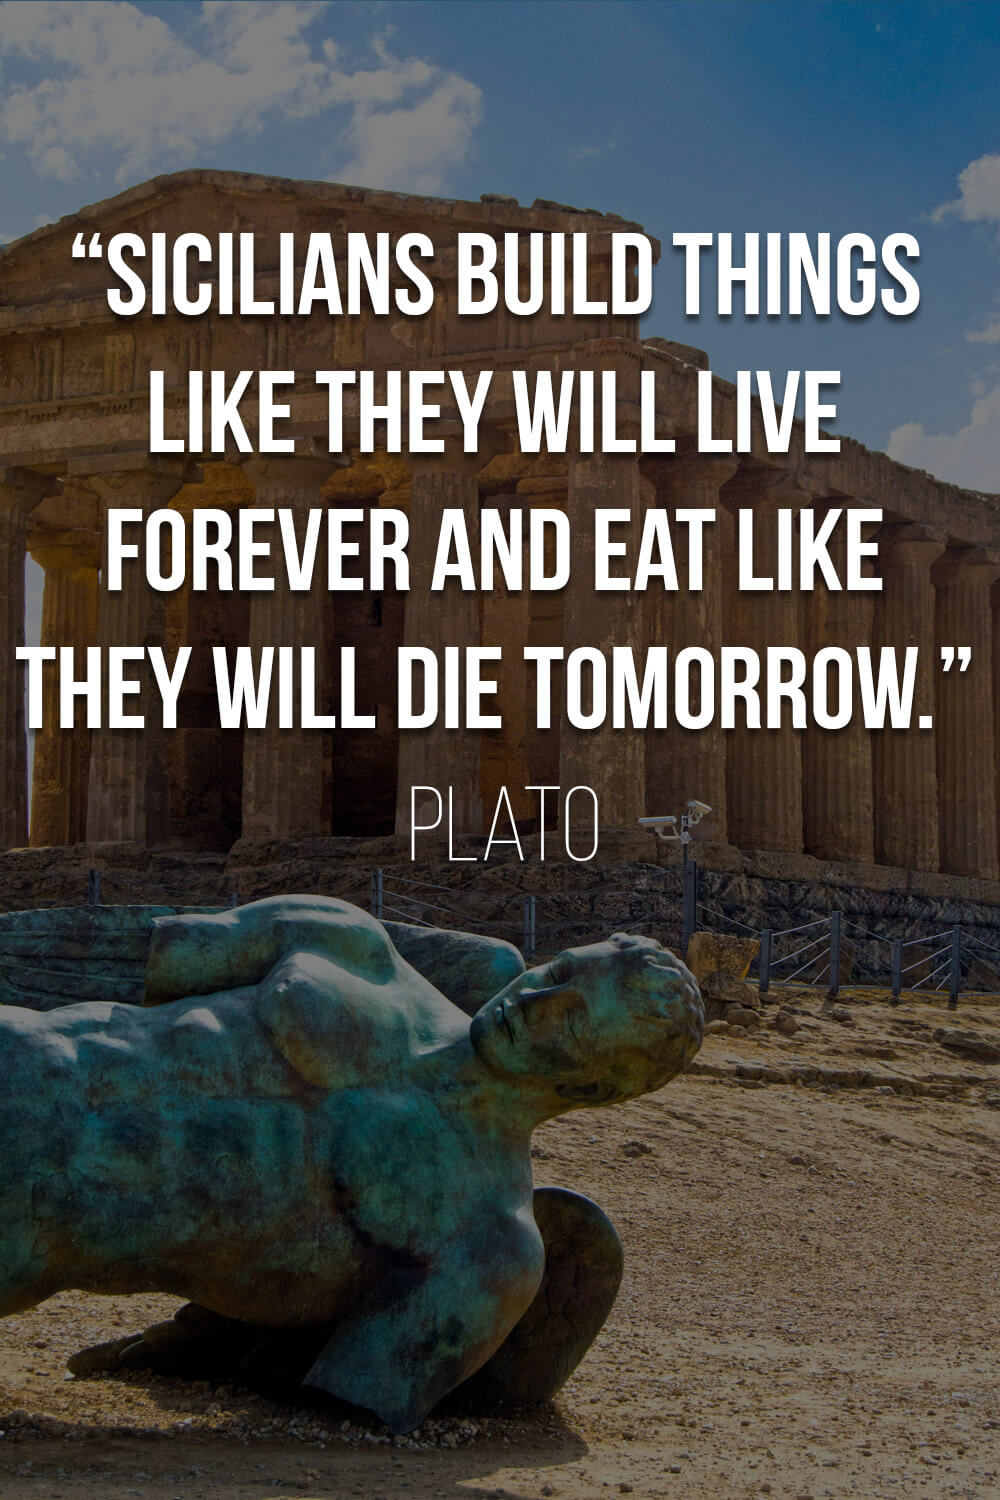 Famous Quotes About Sicily and Stories Behind Them | Travel Geekery